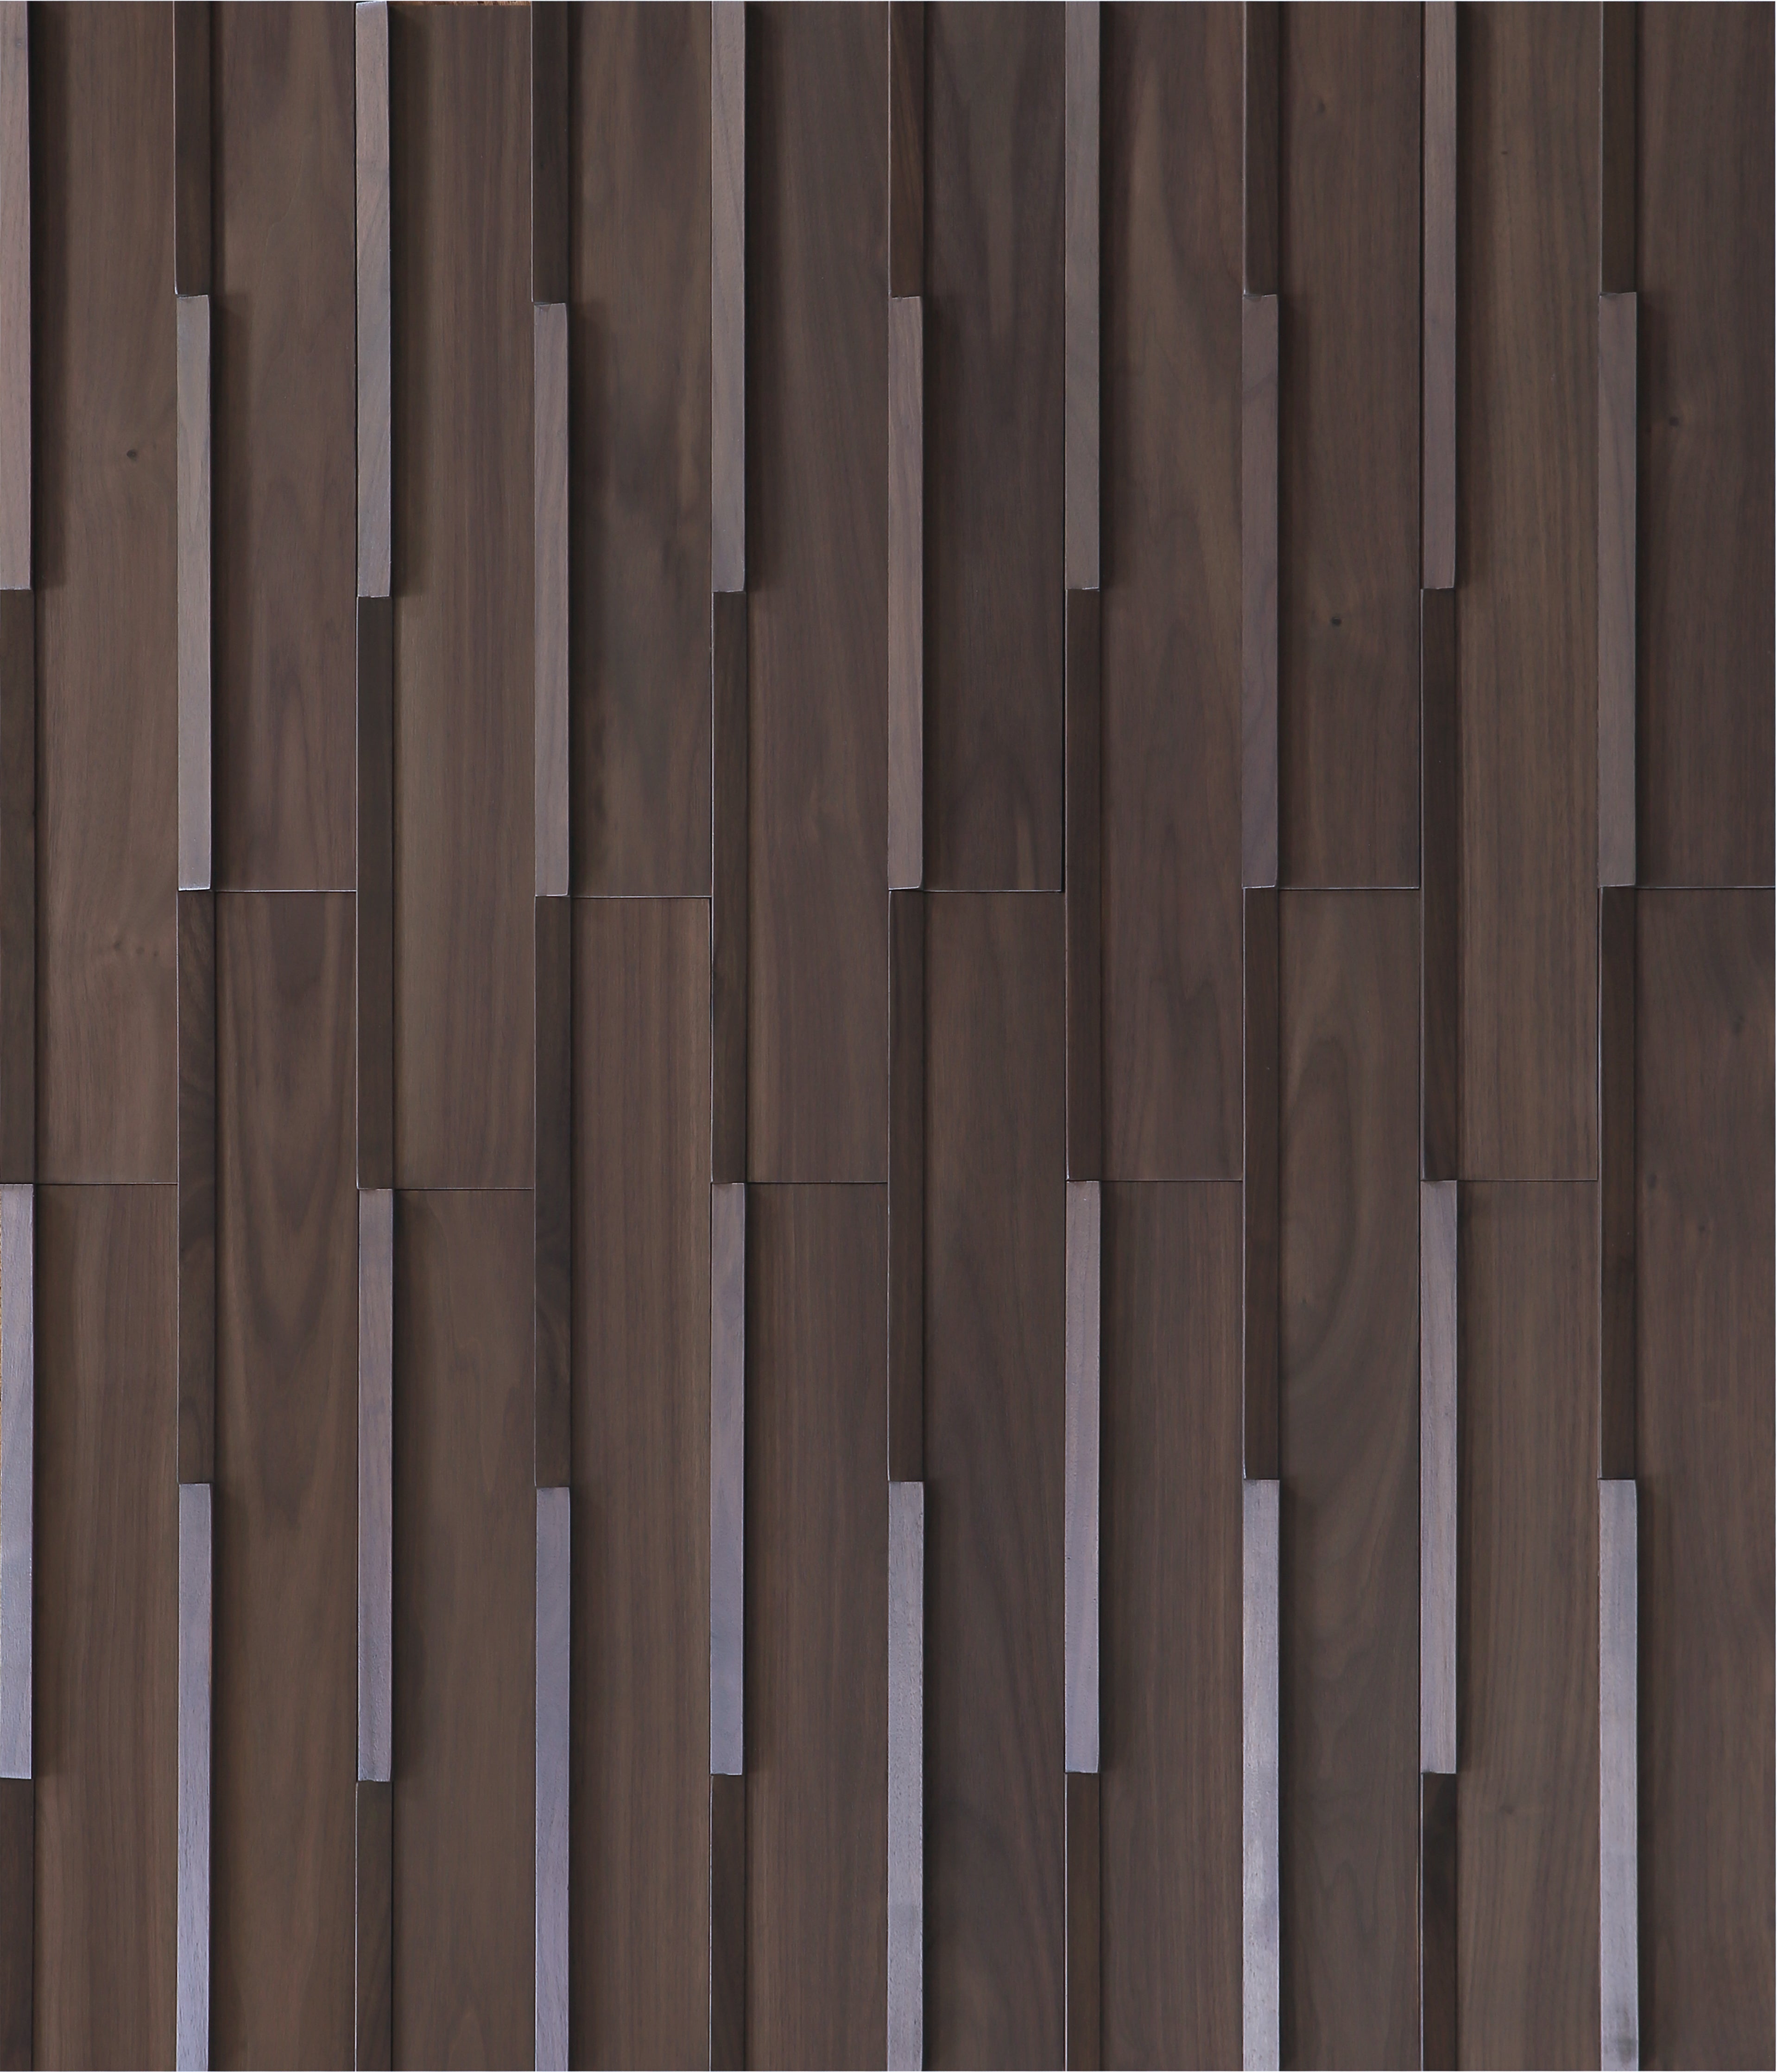 duchateau inceptiv edge brown ash walnut three dimensional wall natural wood panel conversion varnish for interior use distributed by surface group international